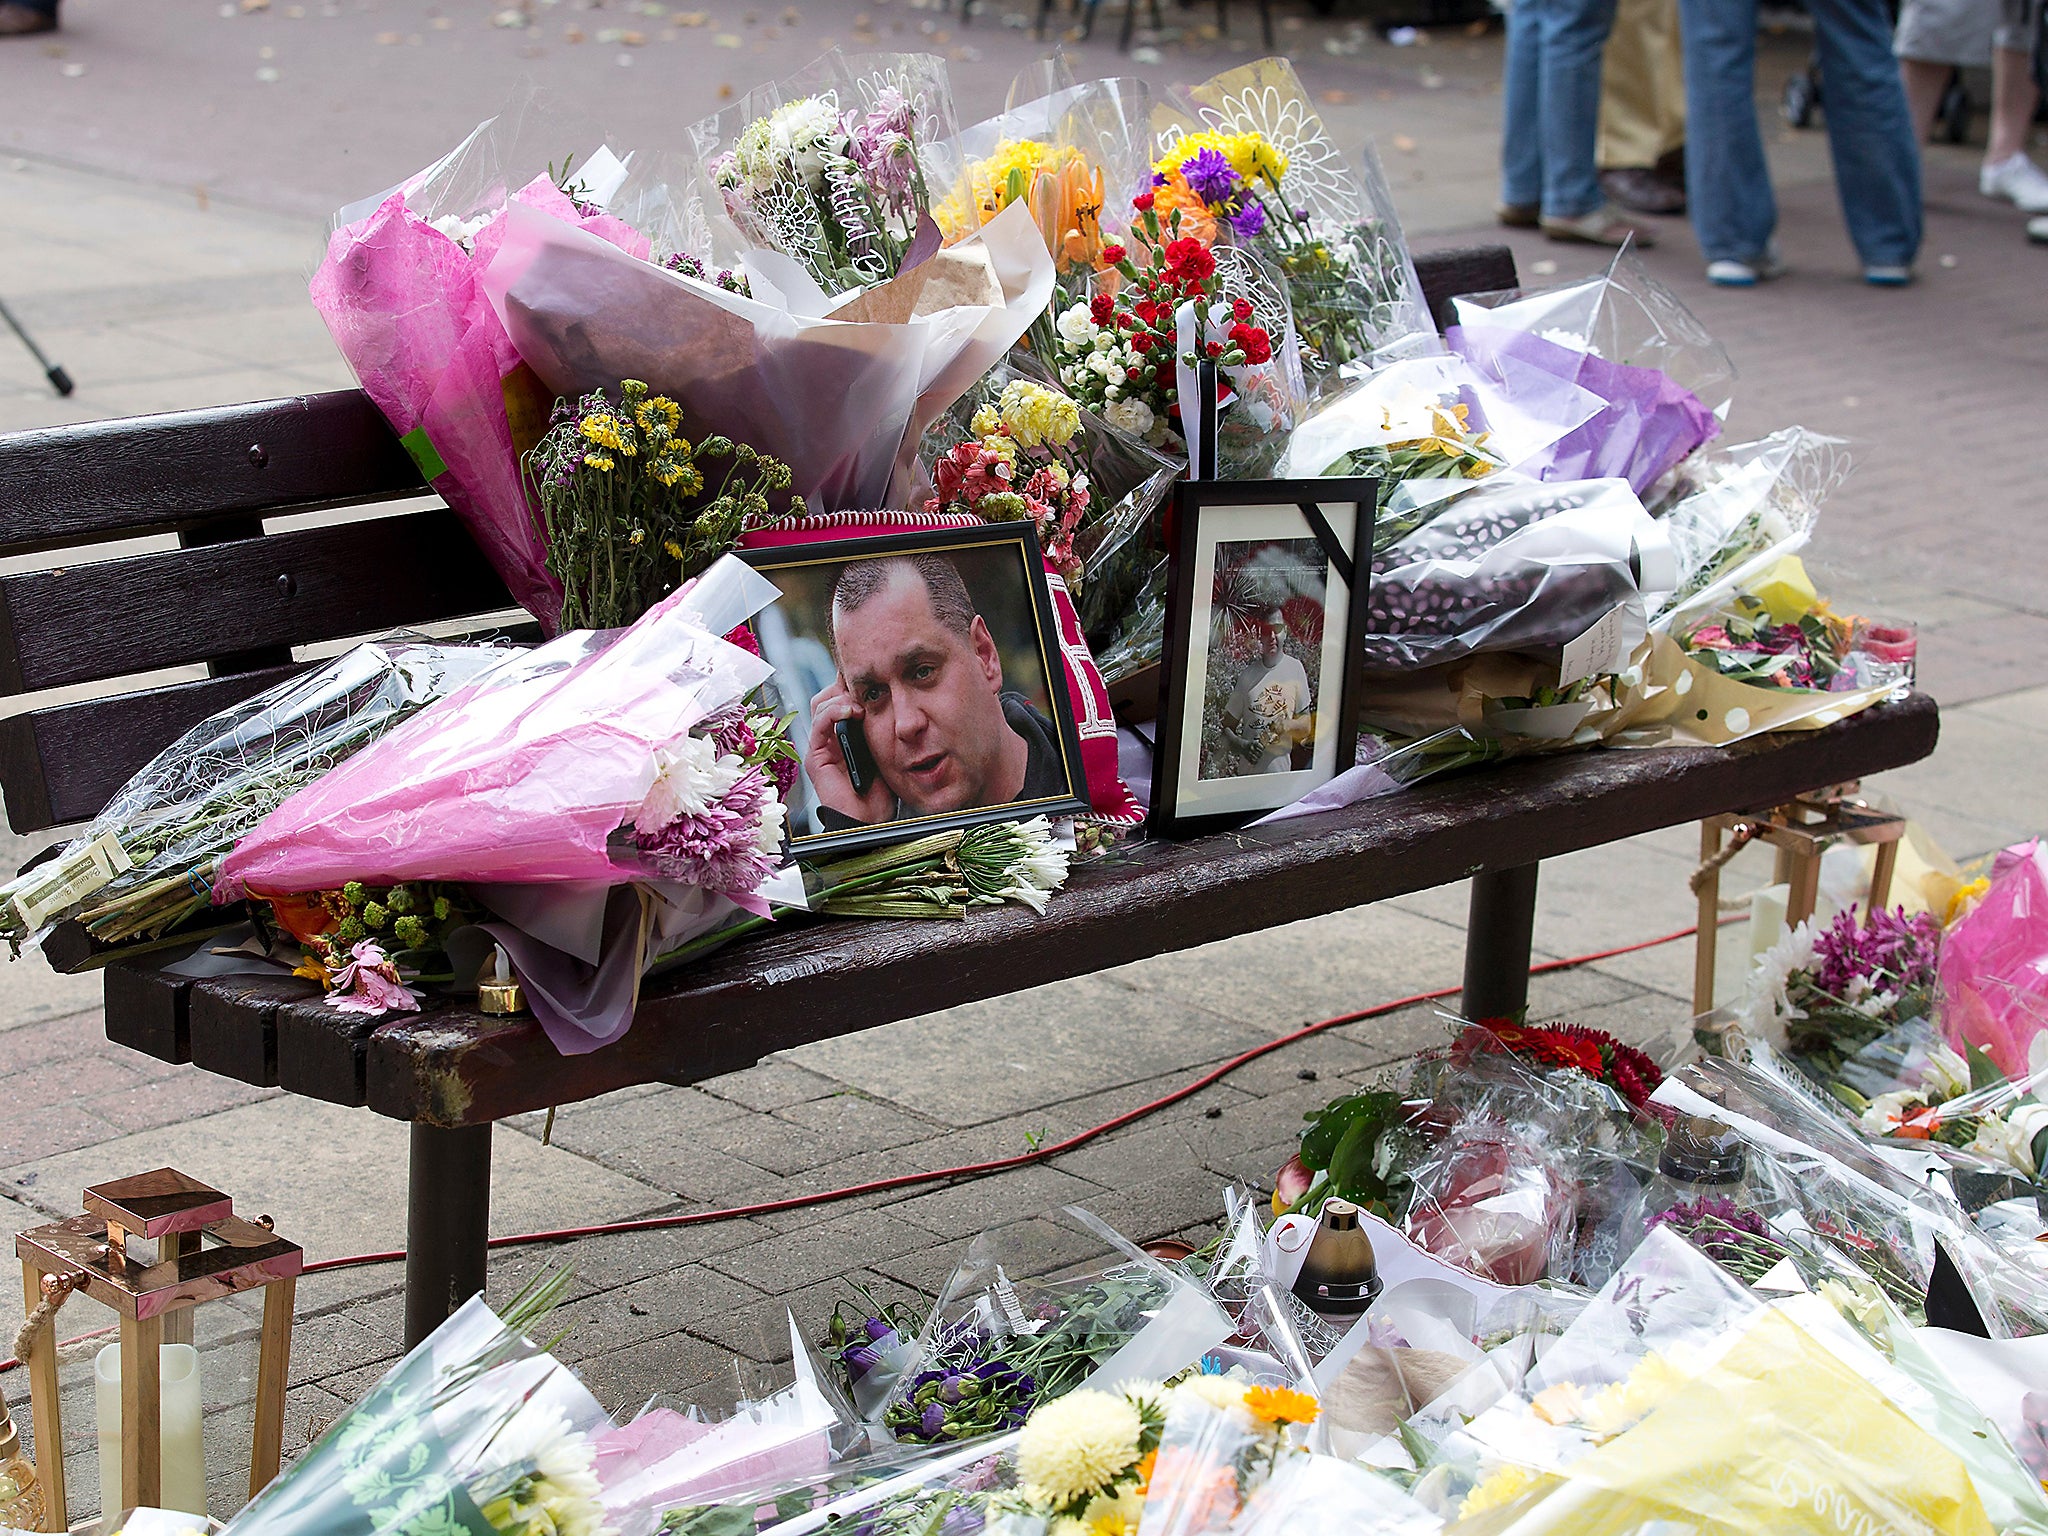 Floral tributes and a photograph of Arek Jozwik are seen on a bench at the shopping centre where he was killed, in Harlow, Essex